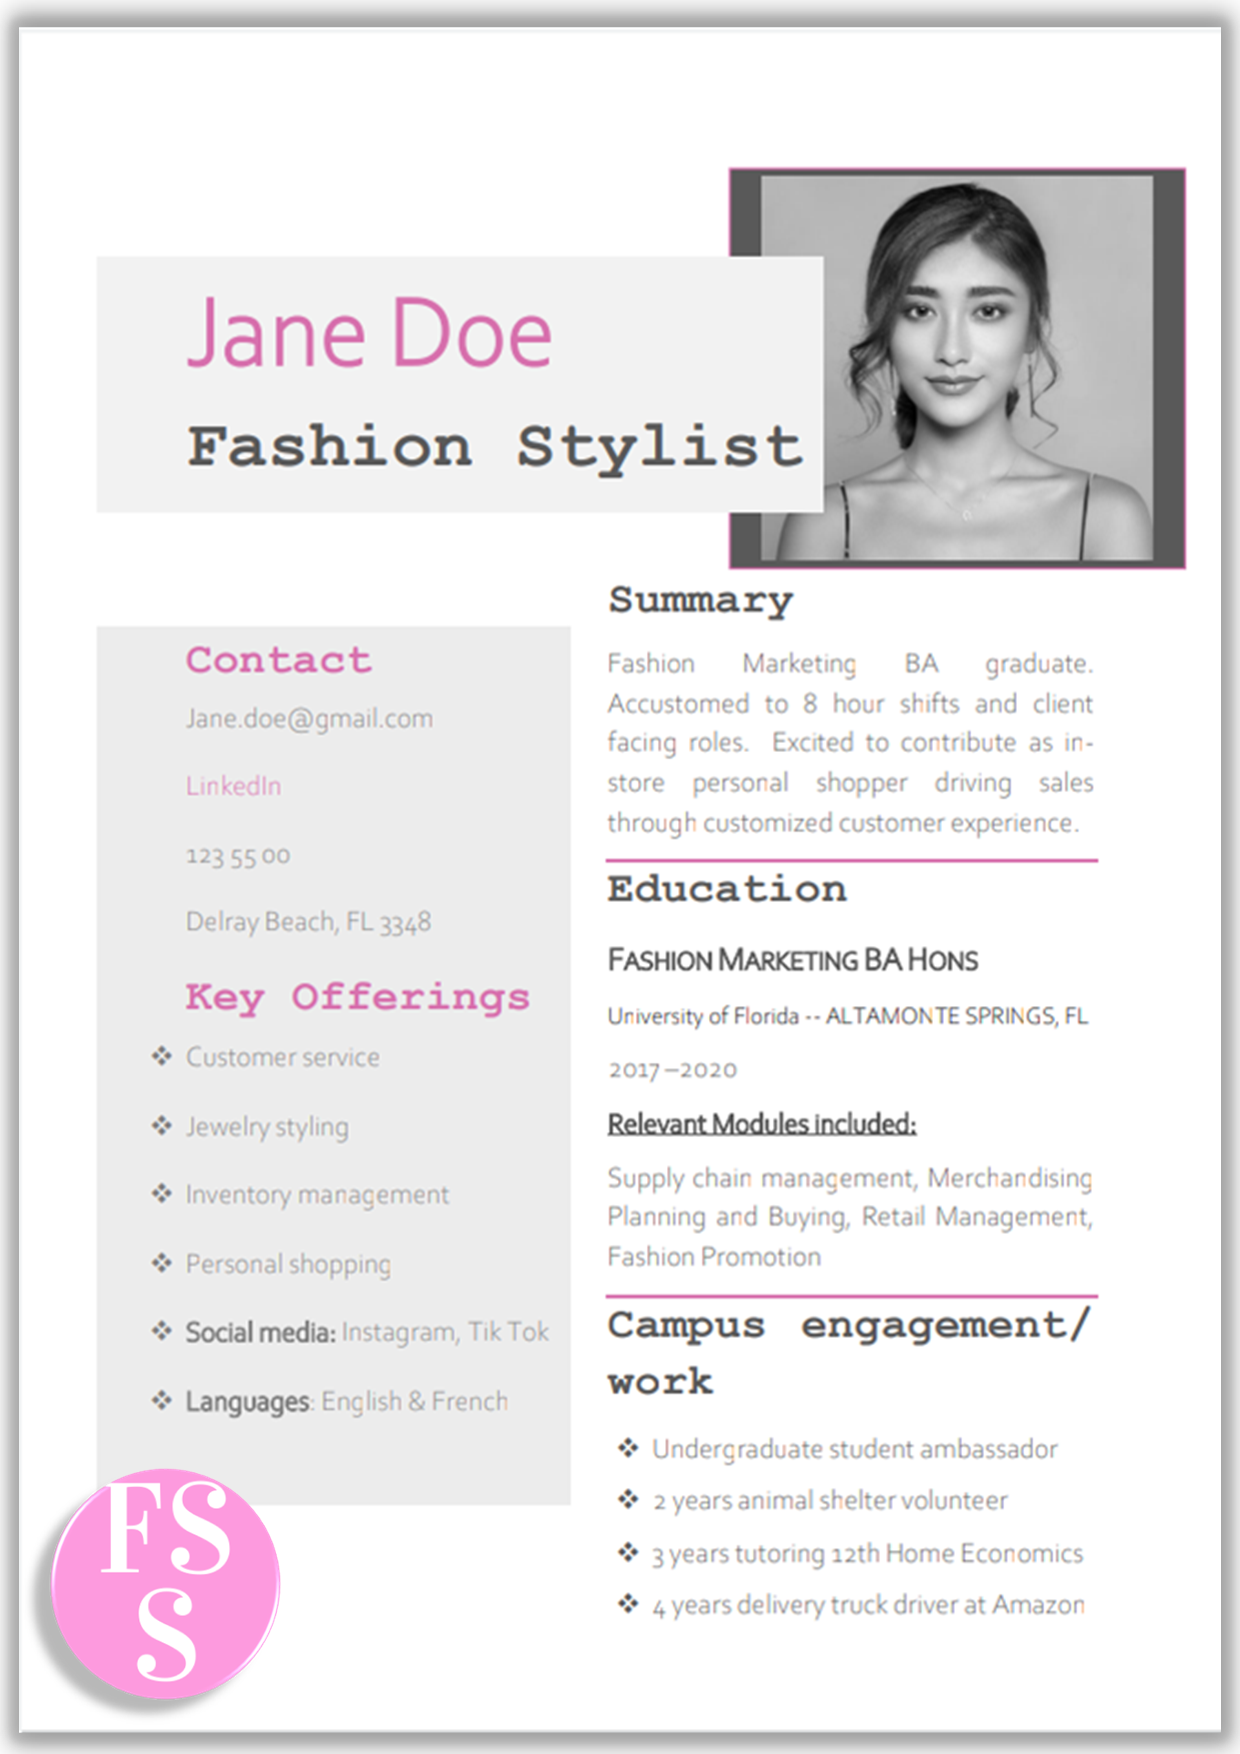 Entry Level Fashion Stylist Resume Template. This creative resume was recommended by recruiters. For more entry level resume tips & templates visit our website.